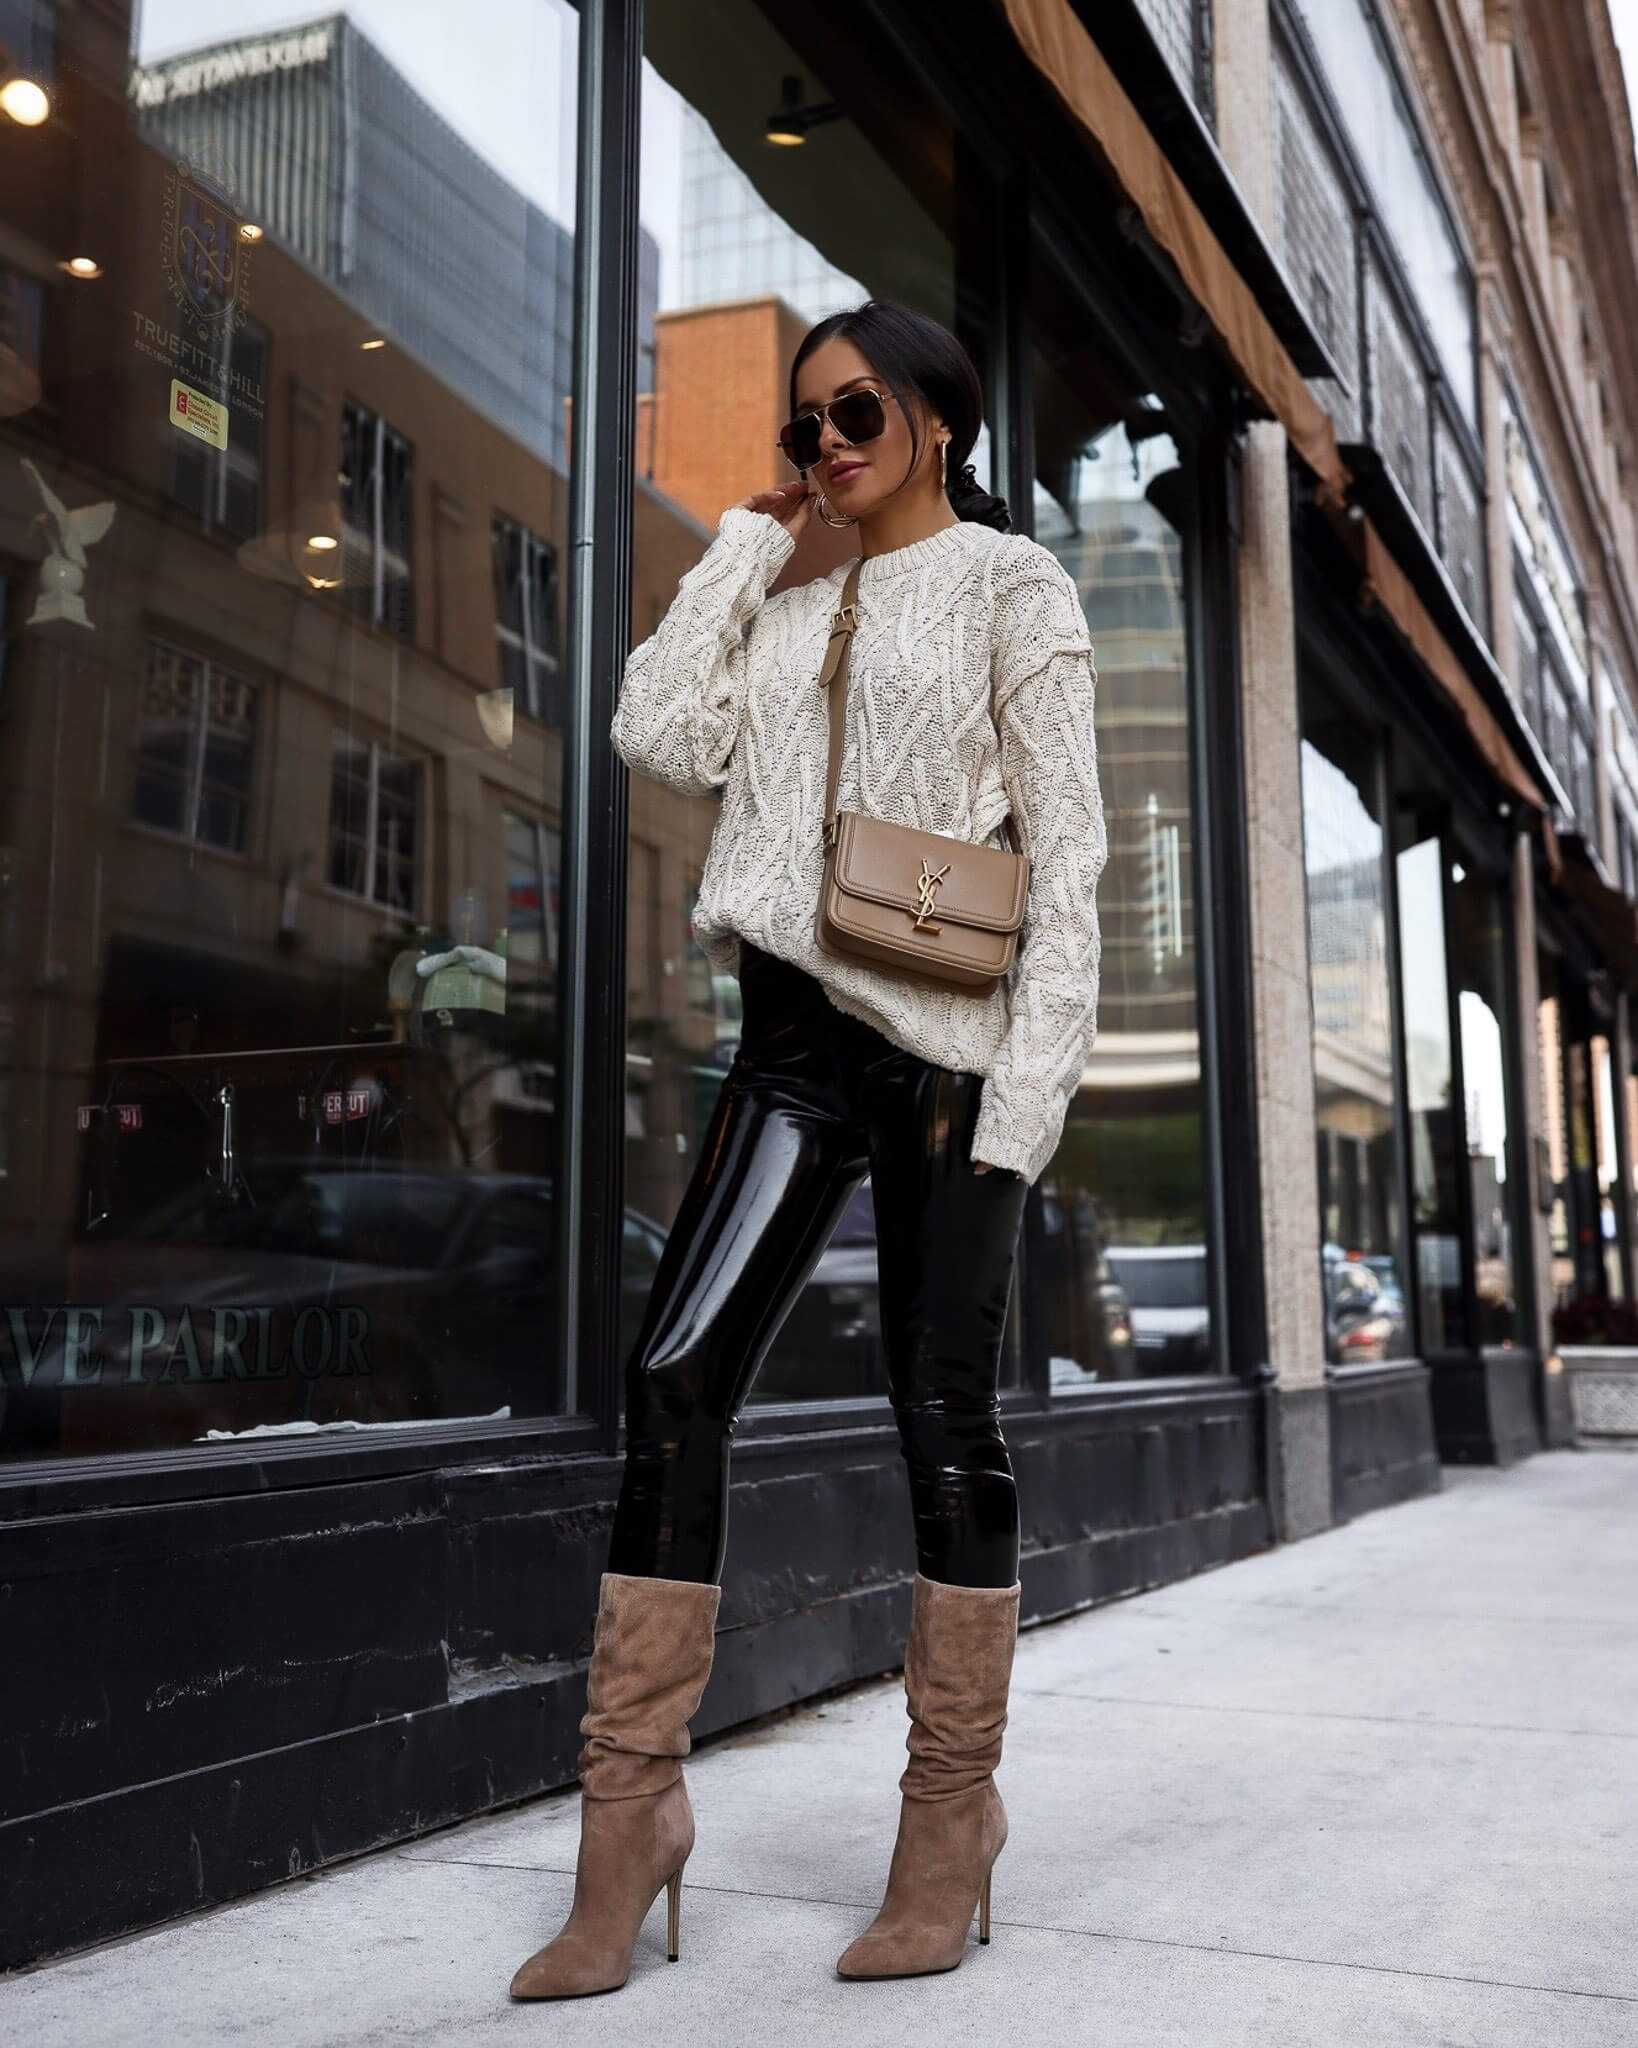 Brown Suede Ankle Boots with Black Leather Leggings Outfits (5 ideas &  outfits)